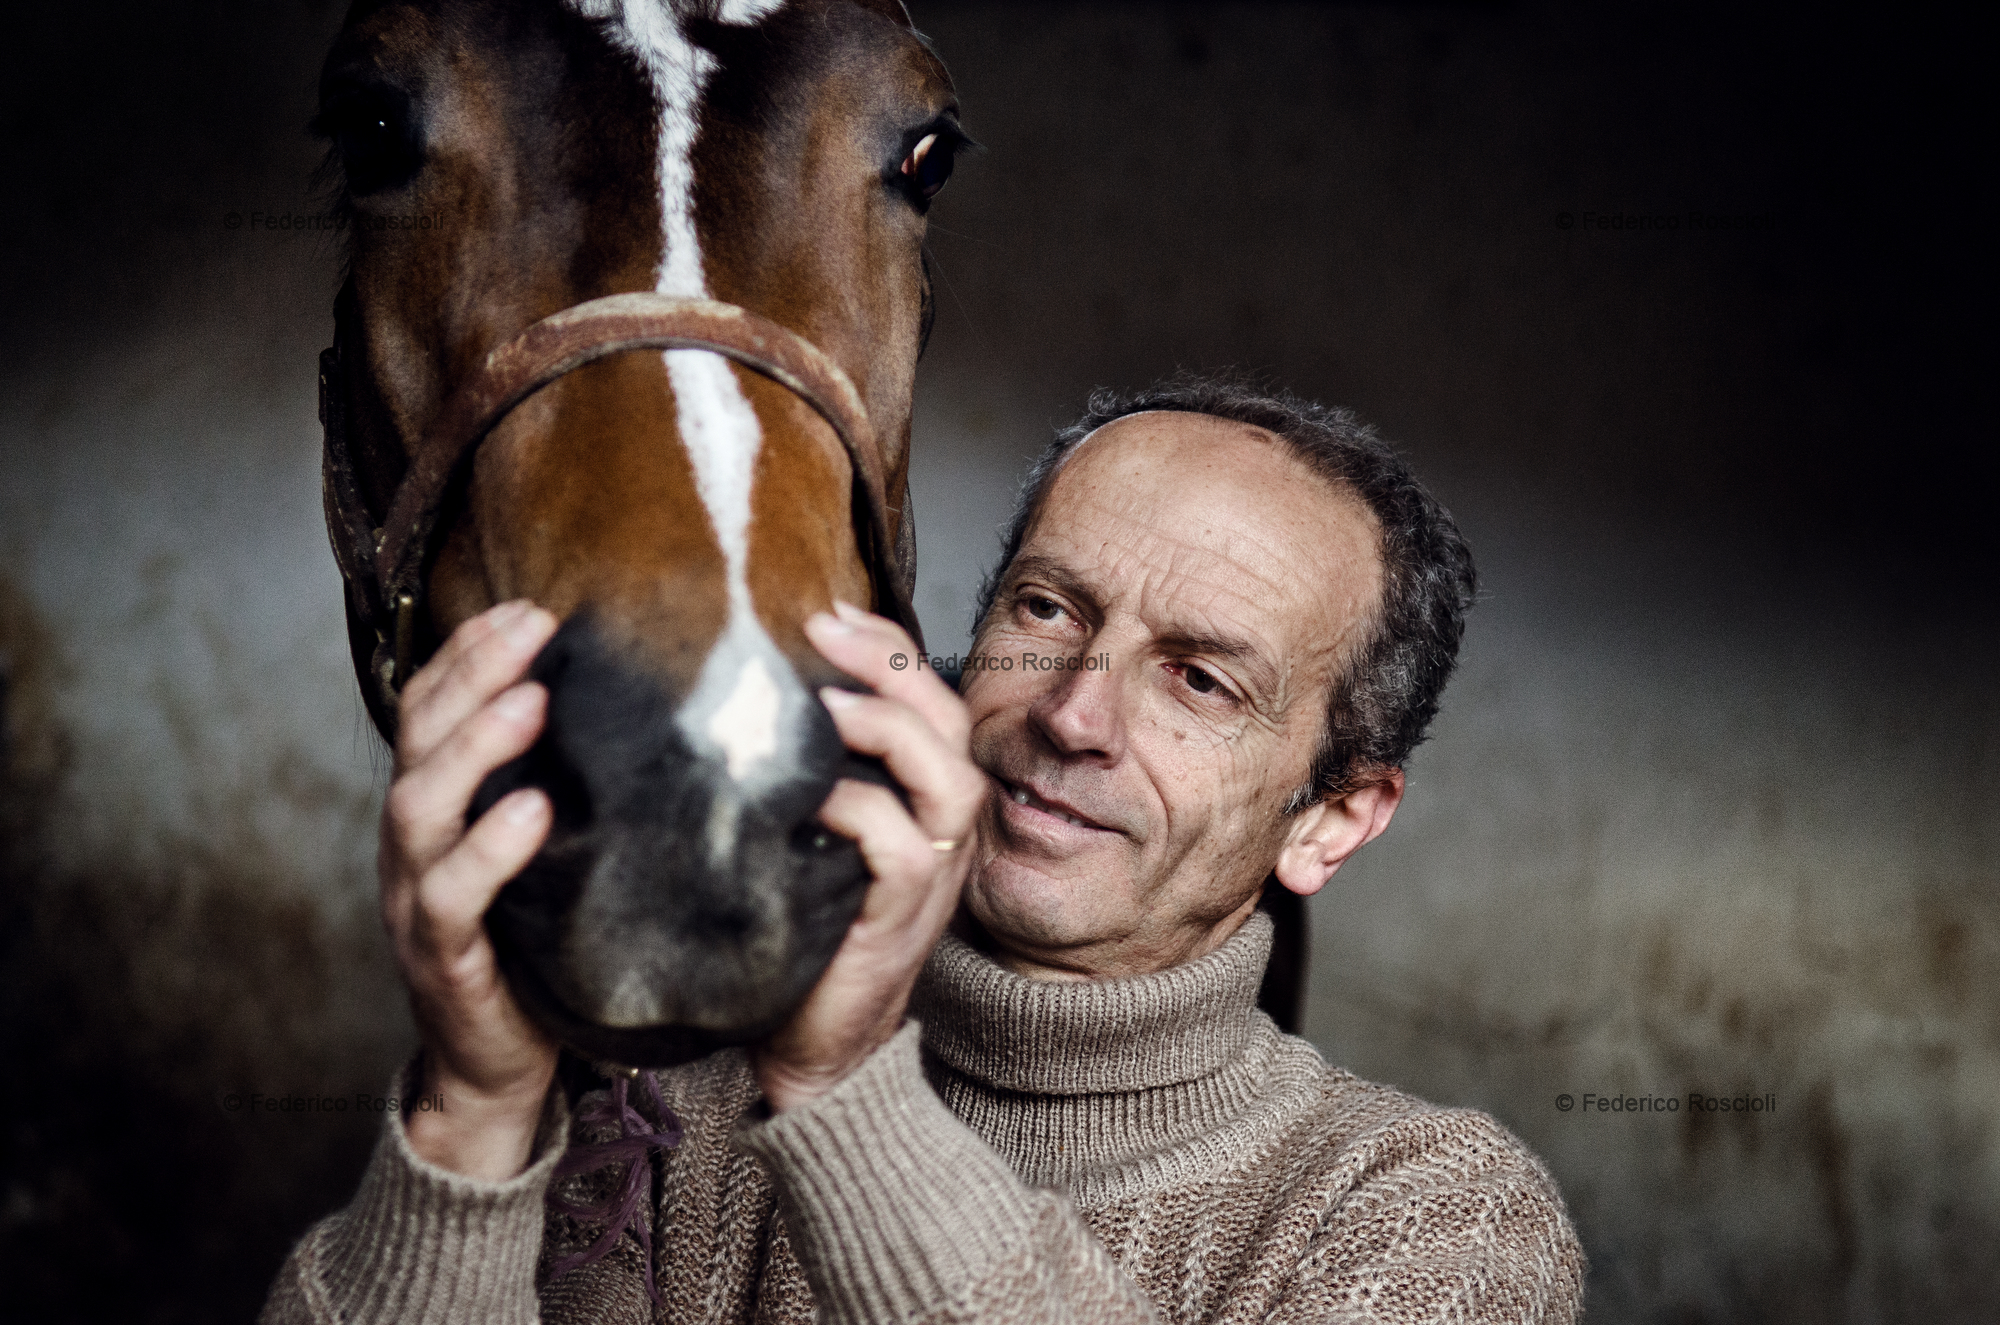 Rome, Italy. March 10, 2013. Fabio Carnevali, president of Assogaloppo (Association of horse racing entrepreneurs), after 20 years of career as horse trainer, becomes unemployed. The owner of his last two horses decided to send them to the countryside and let them live in the field.